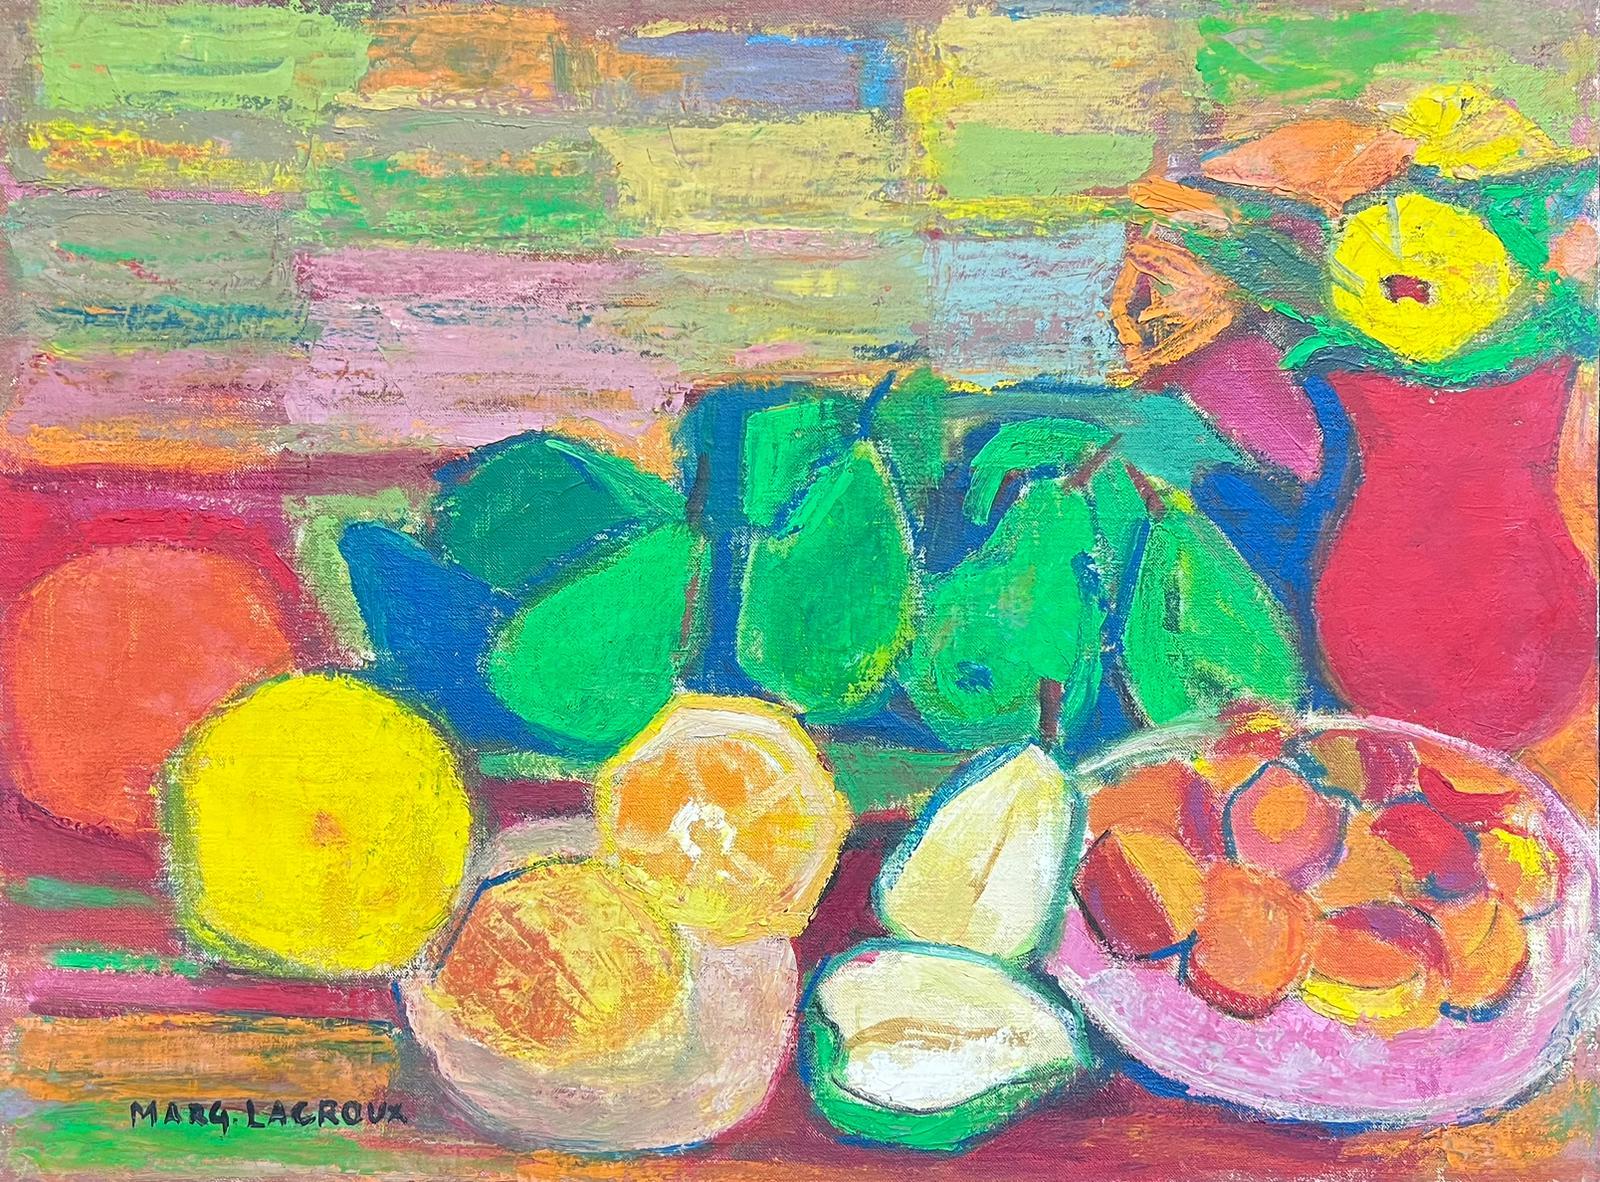 Marguerite Lacroux Interior Painting - Mid 20th Century French Signed Oil Cubist Modernist Still Life Fruit